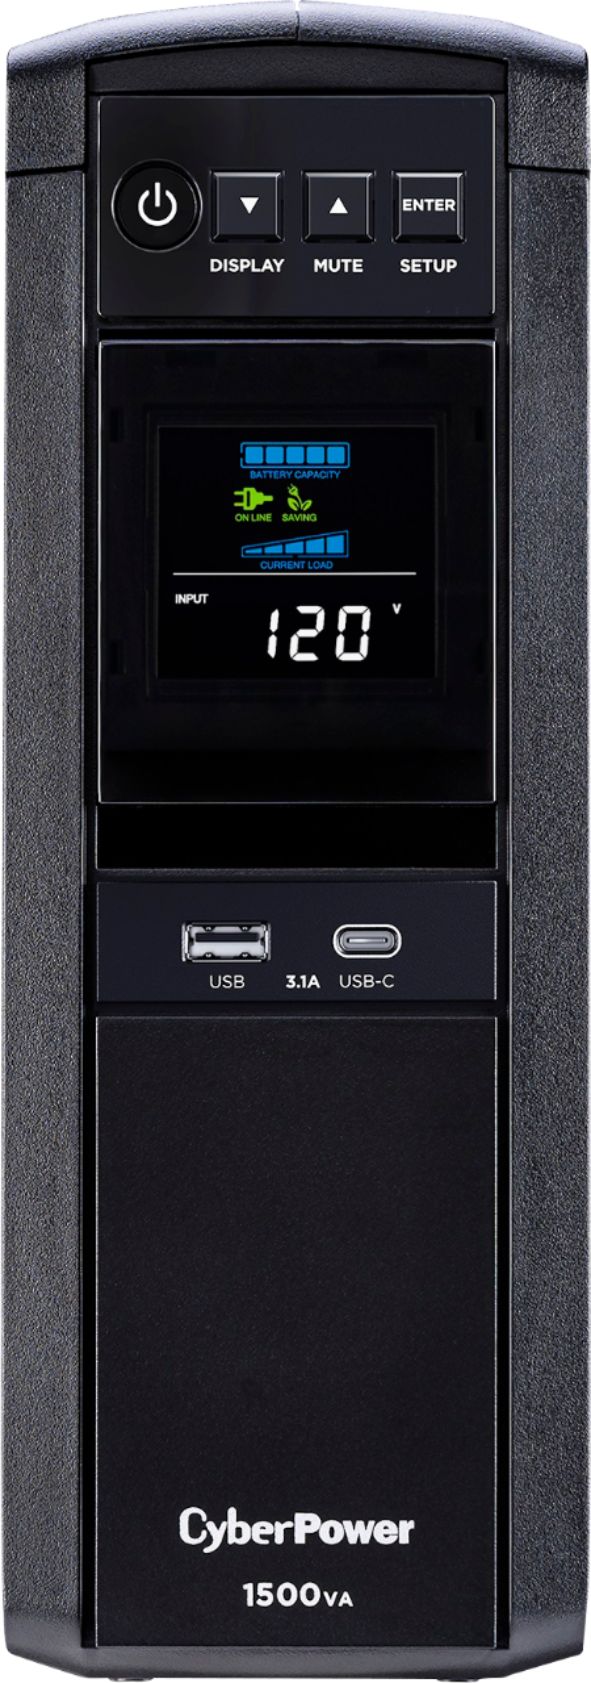 CyberPower 1500VA 120-Volt 10-Outlet 2-USB UPS Battery Backup CP1500PFCLCD  - The Home Depot